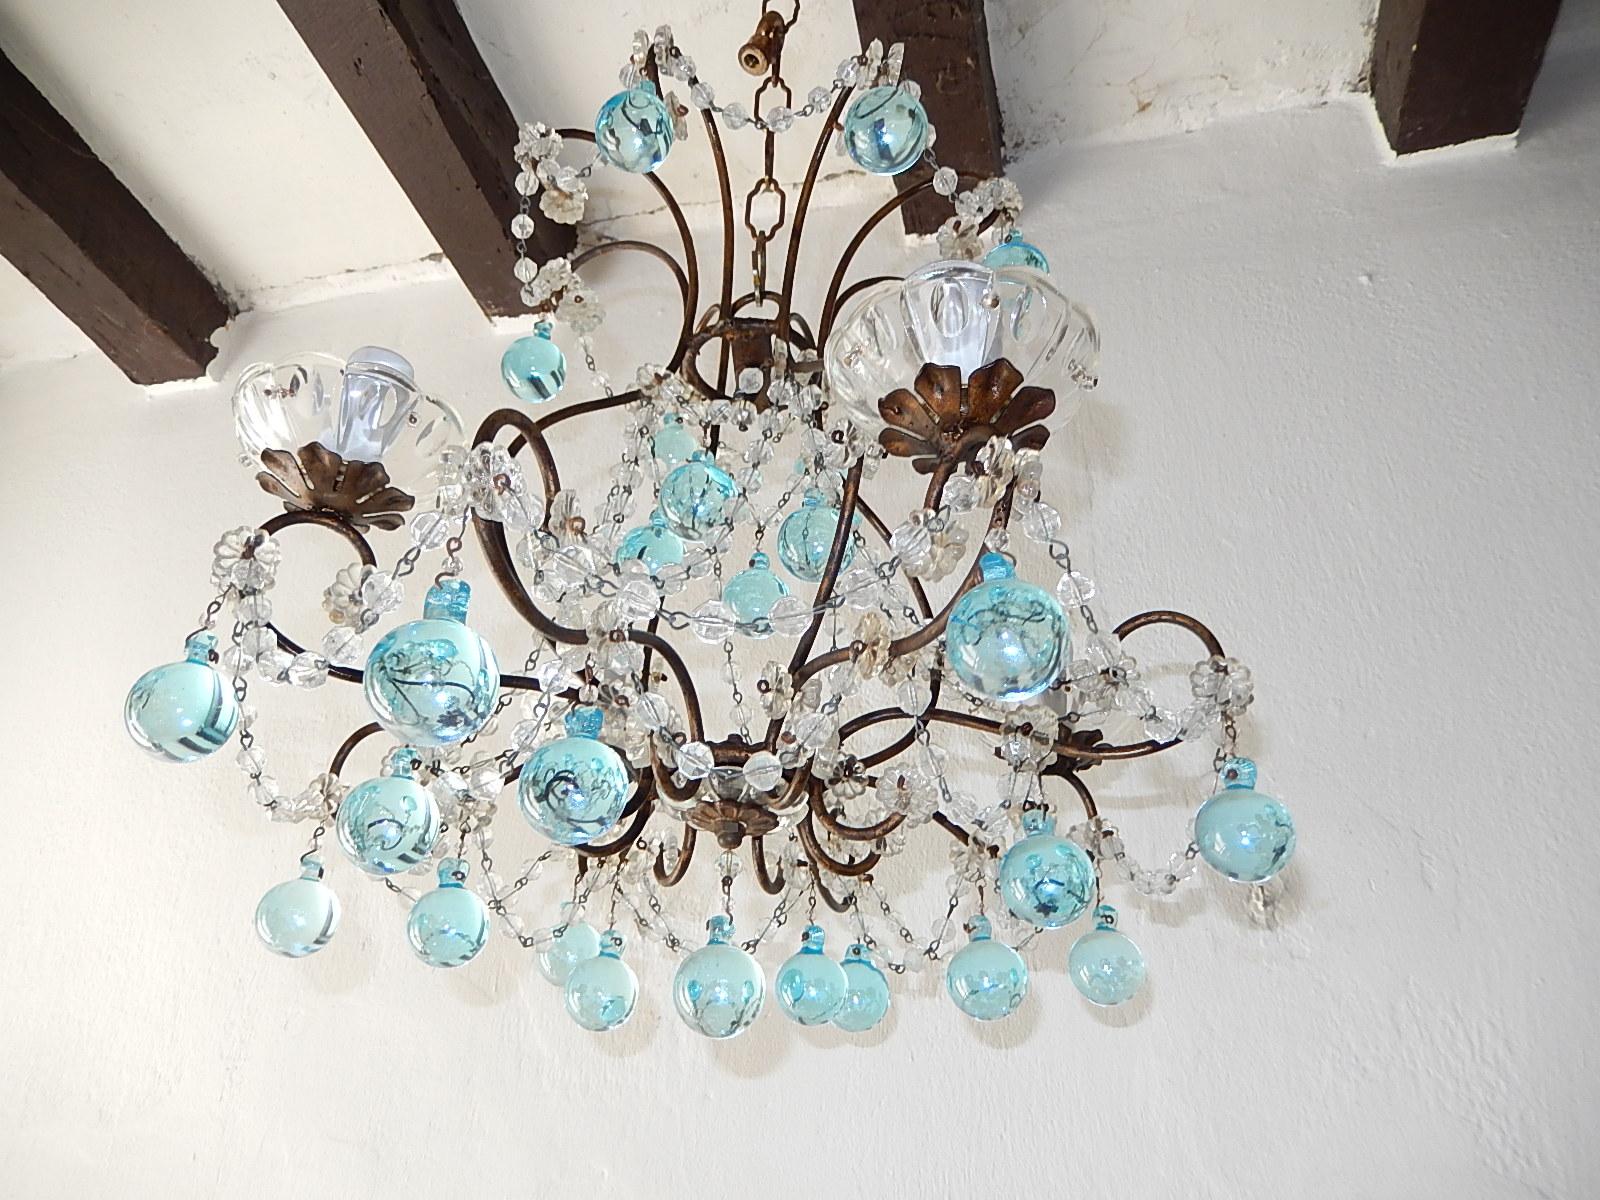 Housing 4 lights sitting in crystal bobeches, dripping with crystal balls. Will be rewired with certified US UL sockets for USA and appropriate sockets for all other countries and ready to hang. Swags of crystal and florets throughout. Murano aqua